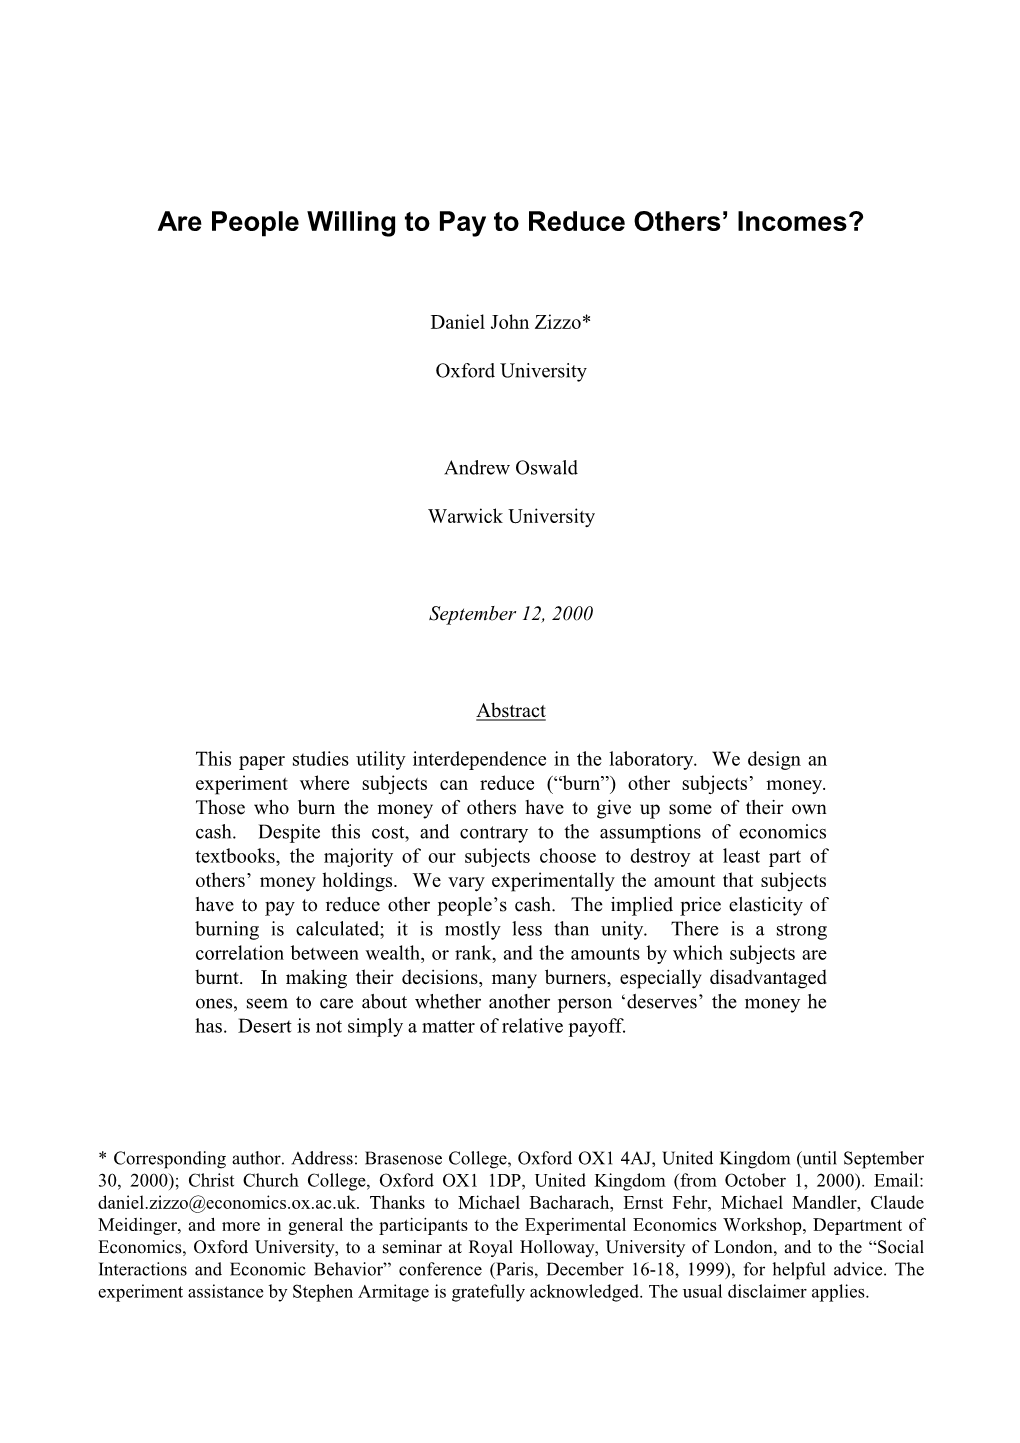 Are People Willing to Pay to Reduce Others' Incomes